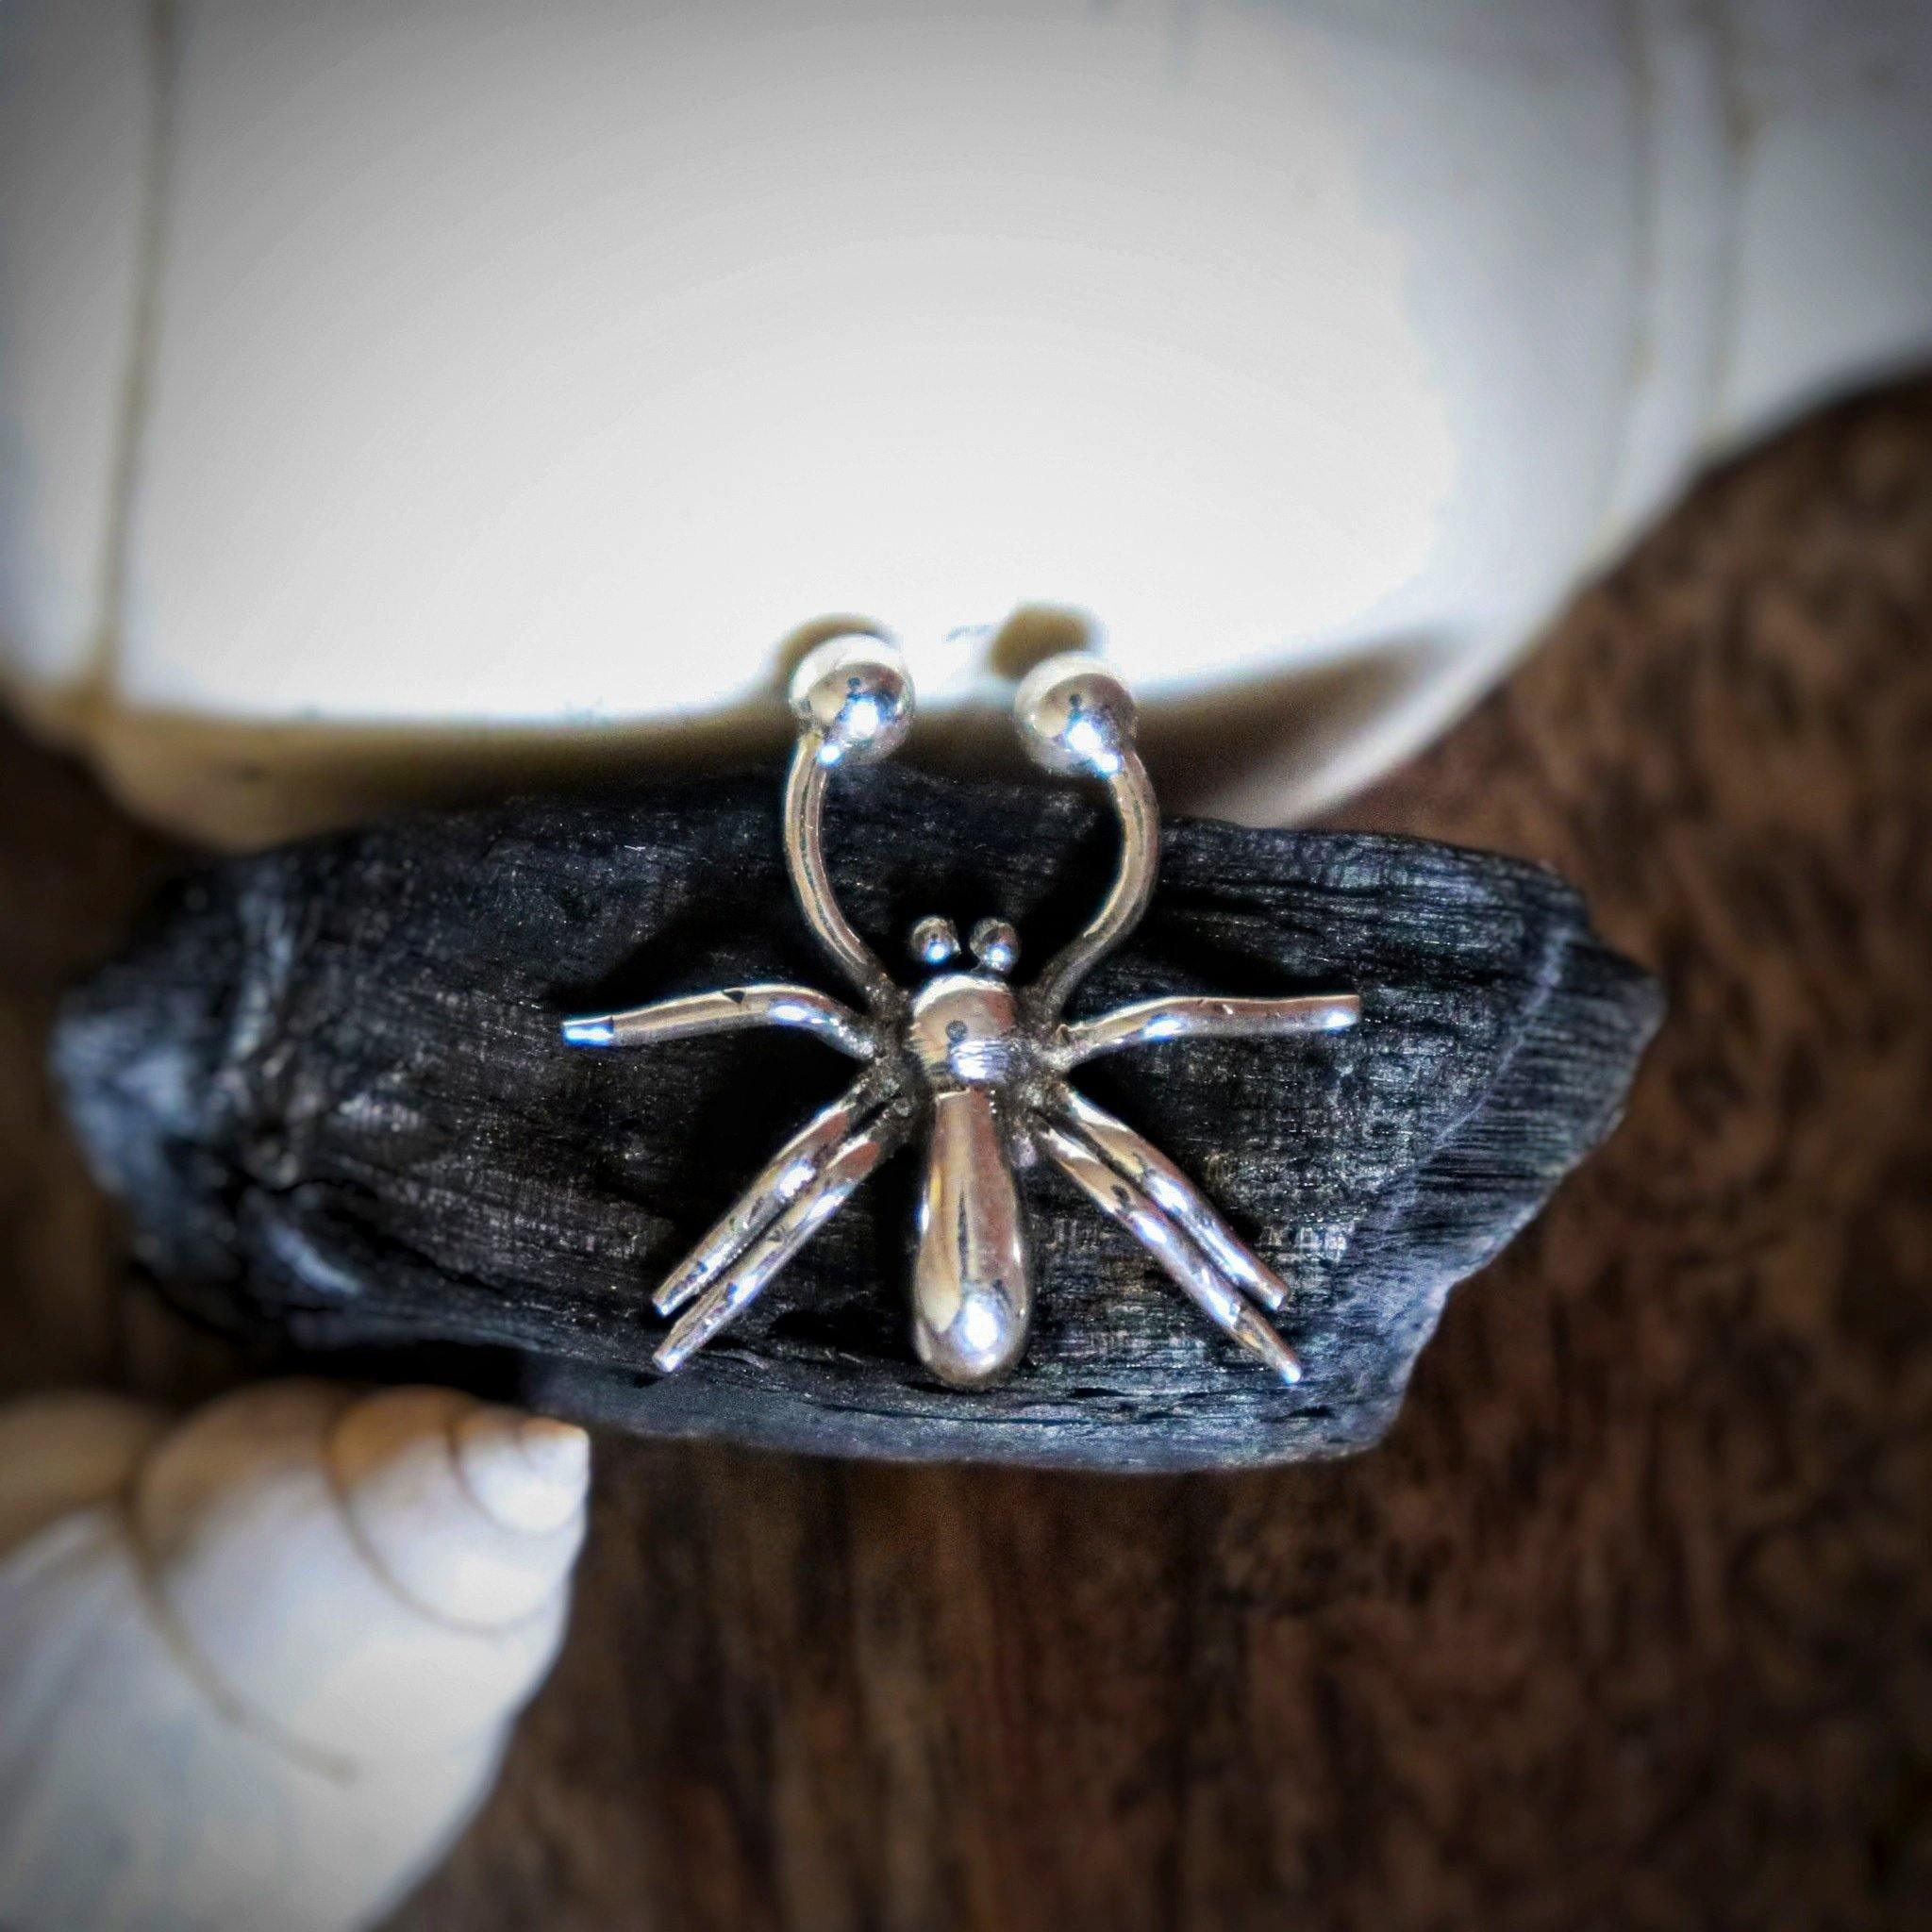 Buy Spider Web Ring, Sterling Silver Spider Lover Jewelry, Cocktail Spider  Ring Online in India - Etsy